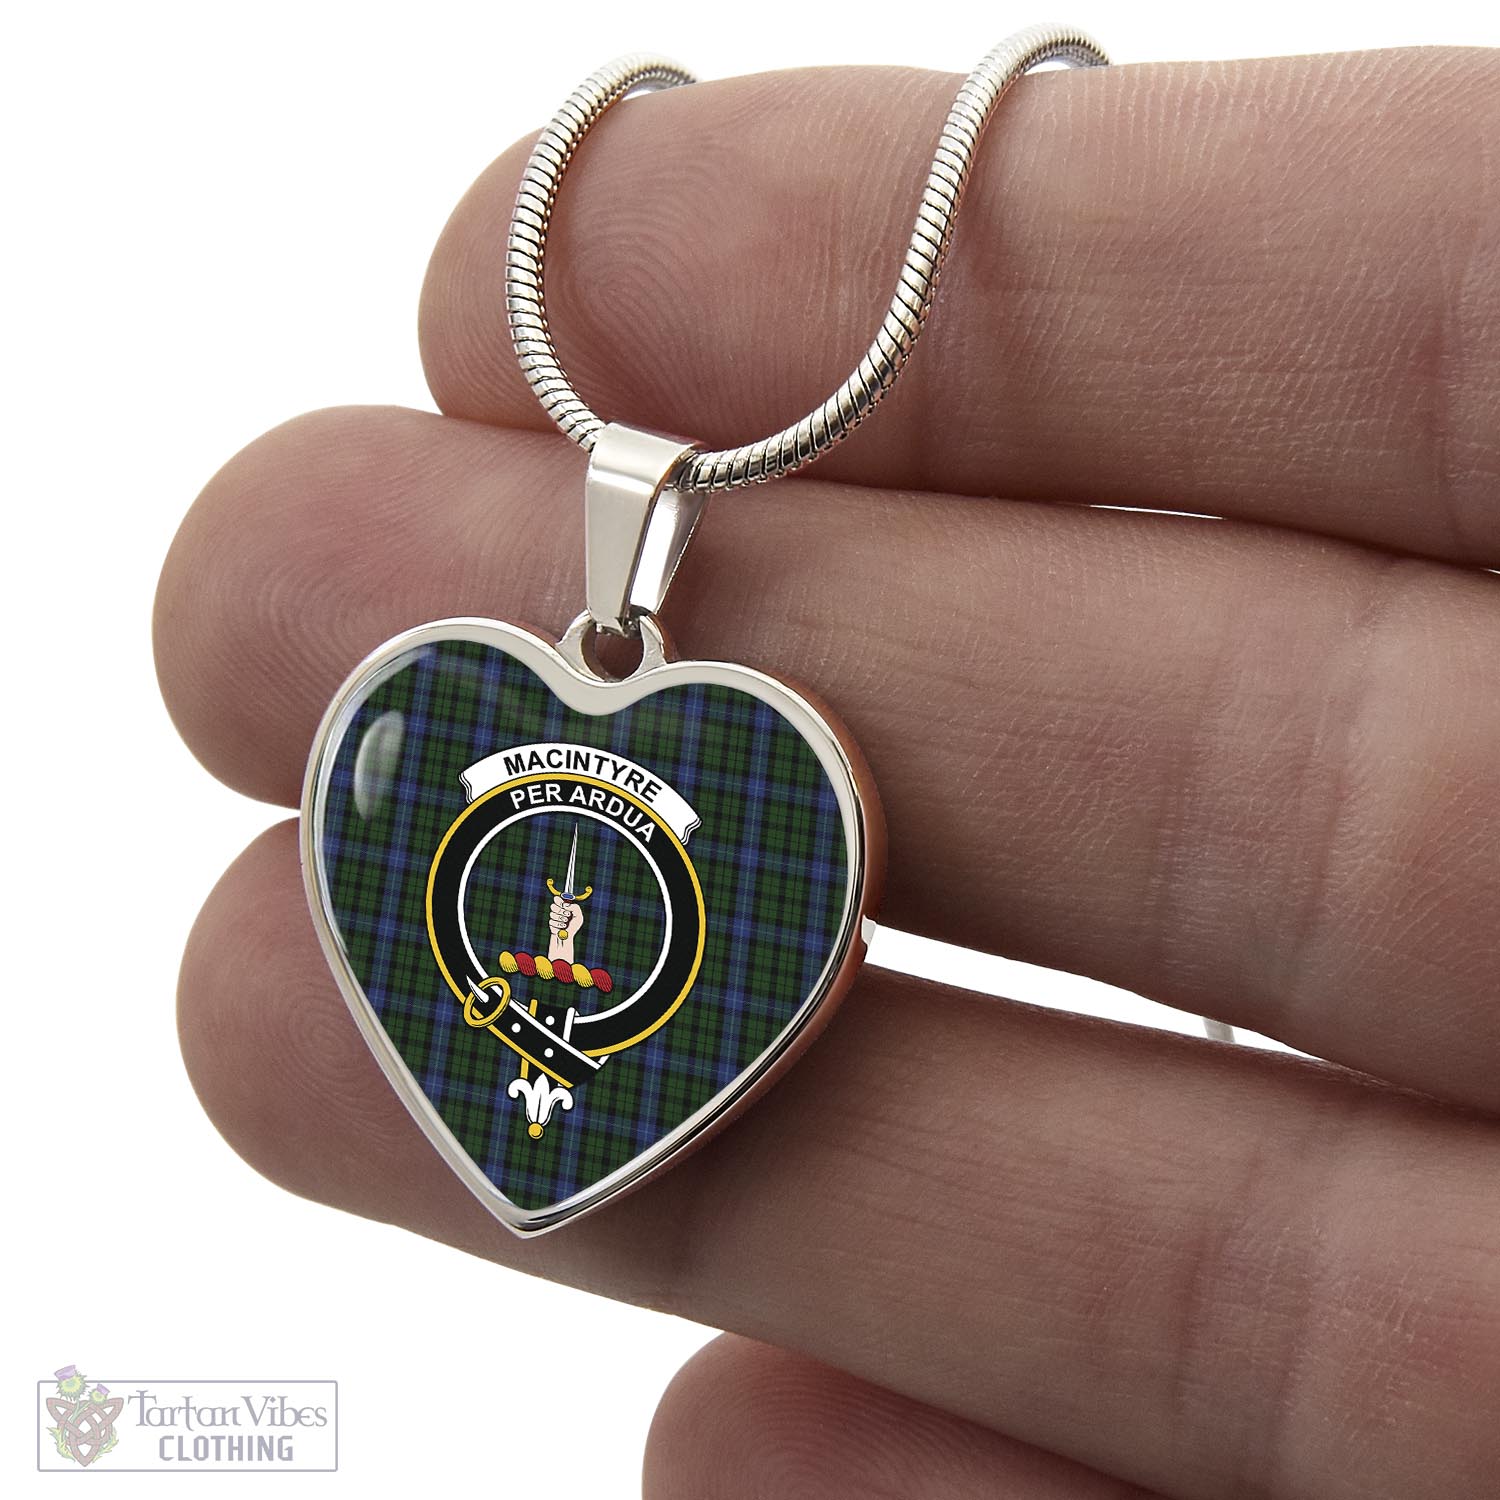 Tartan Vibes Clothing MacIntyre Tartan Heart Necklace with Family Crest